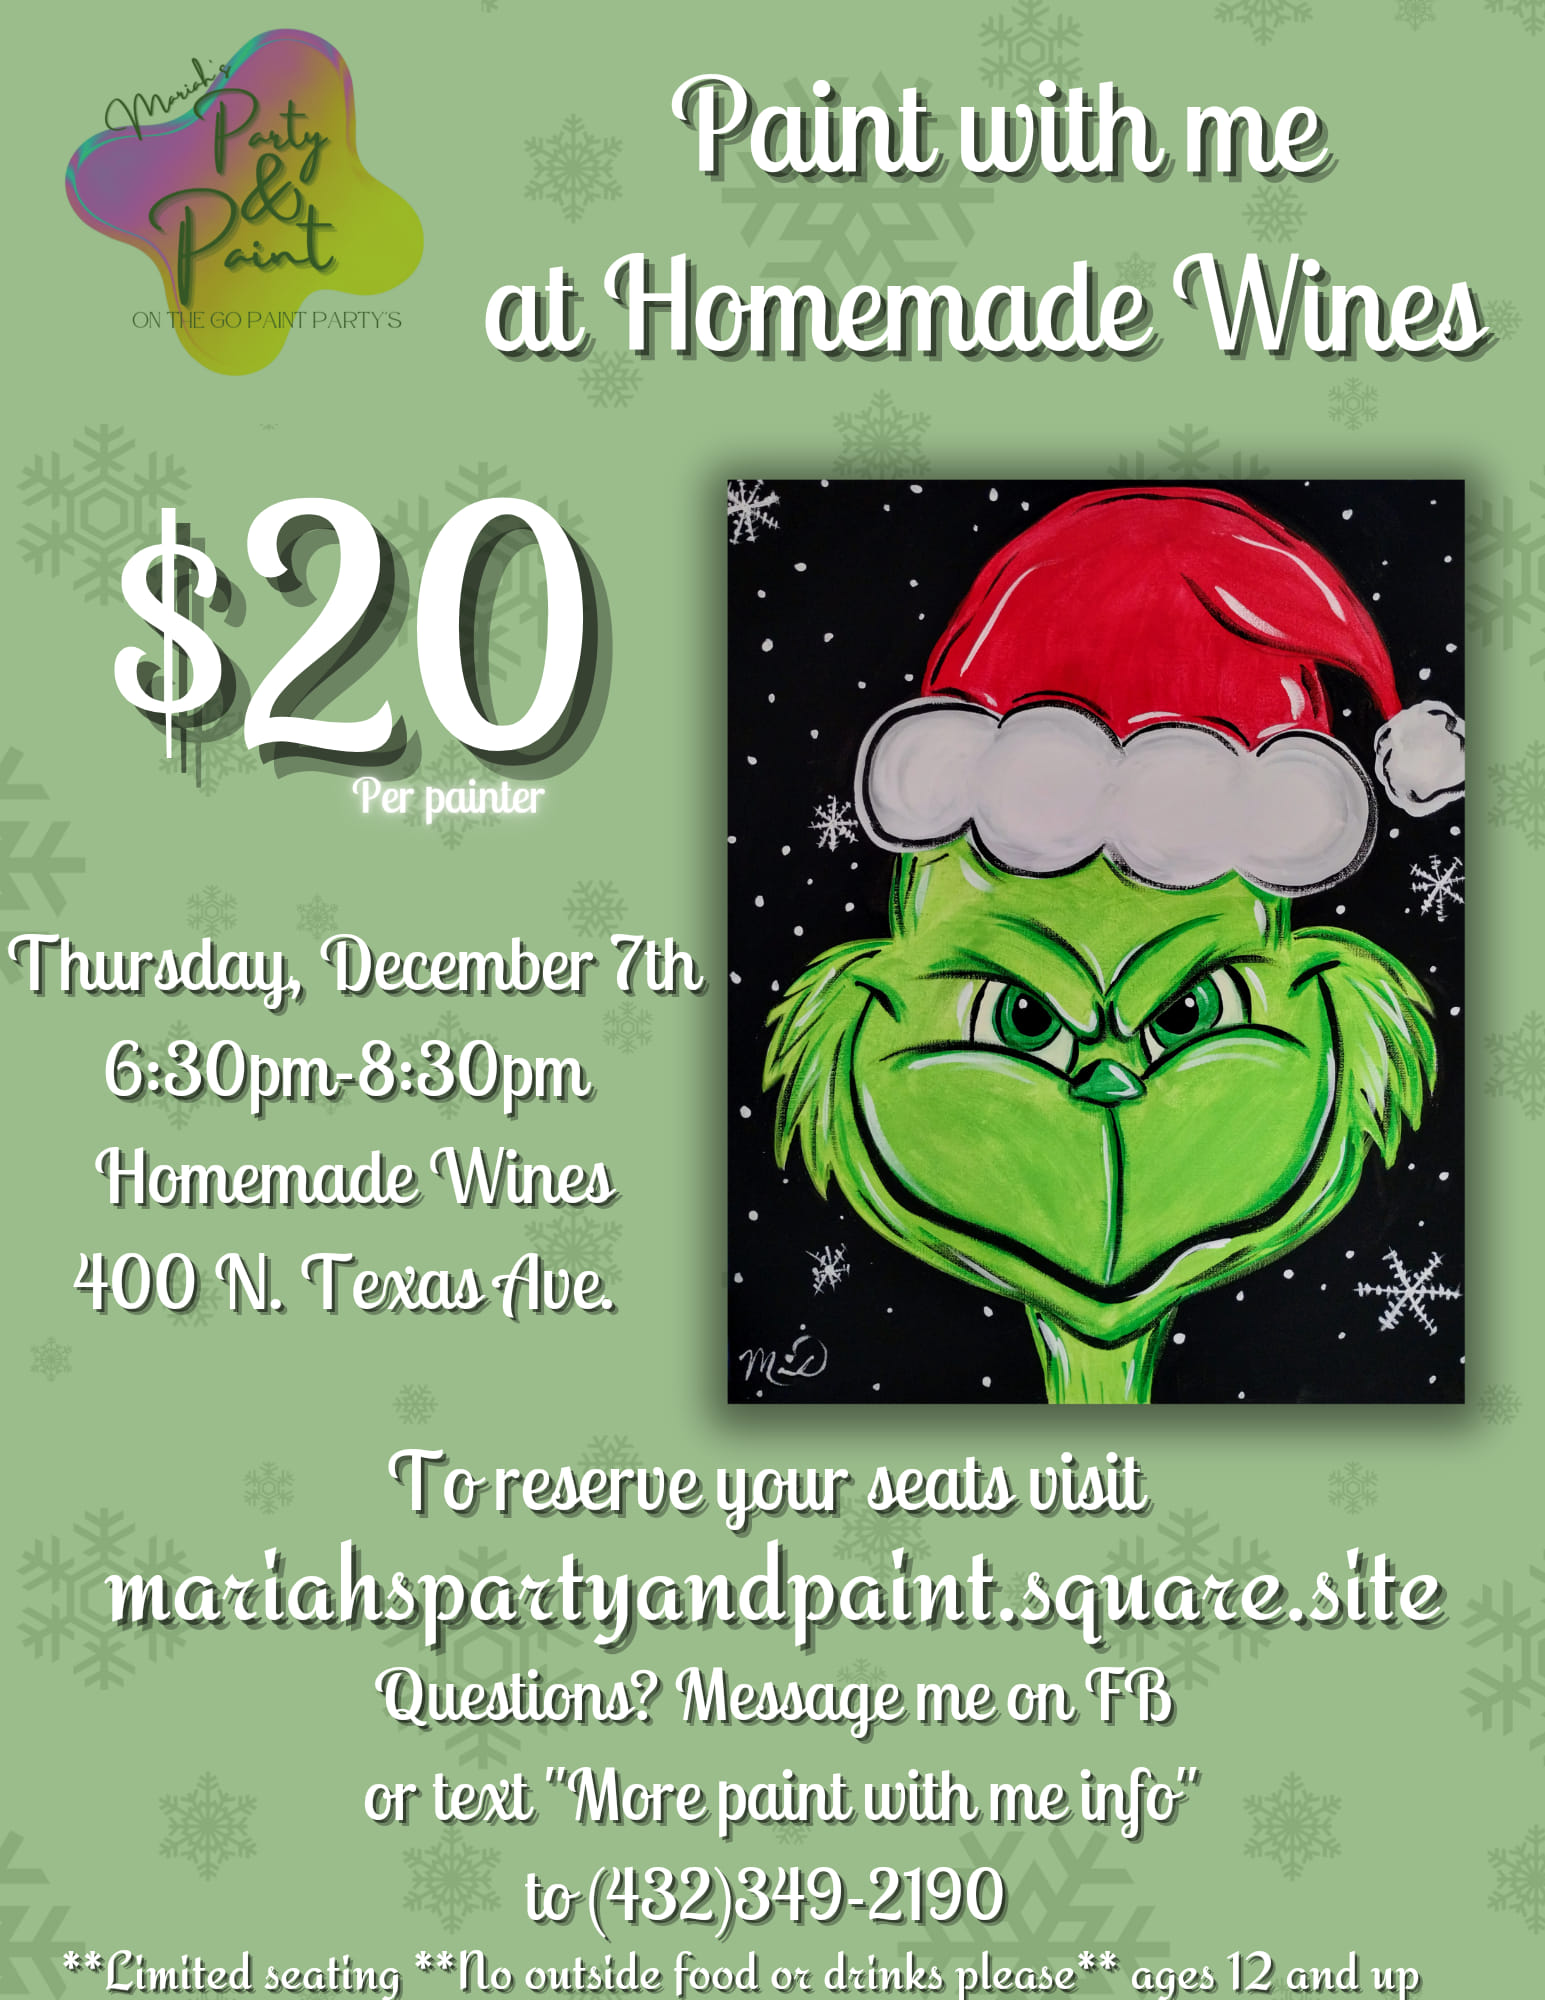 Paint with Me at Homemade Wines Downtown in Odessa, TX